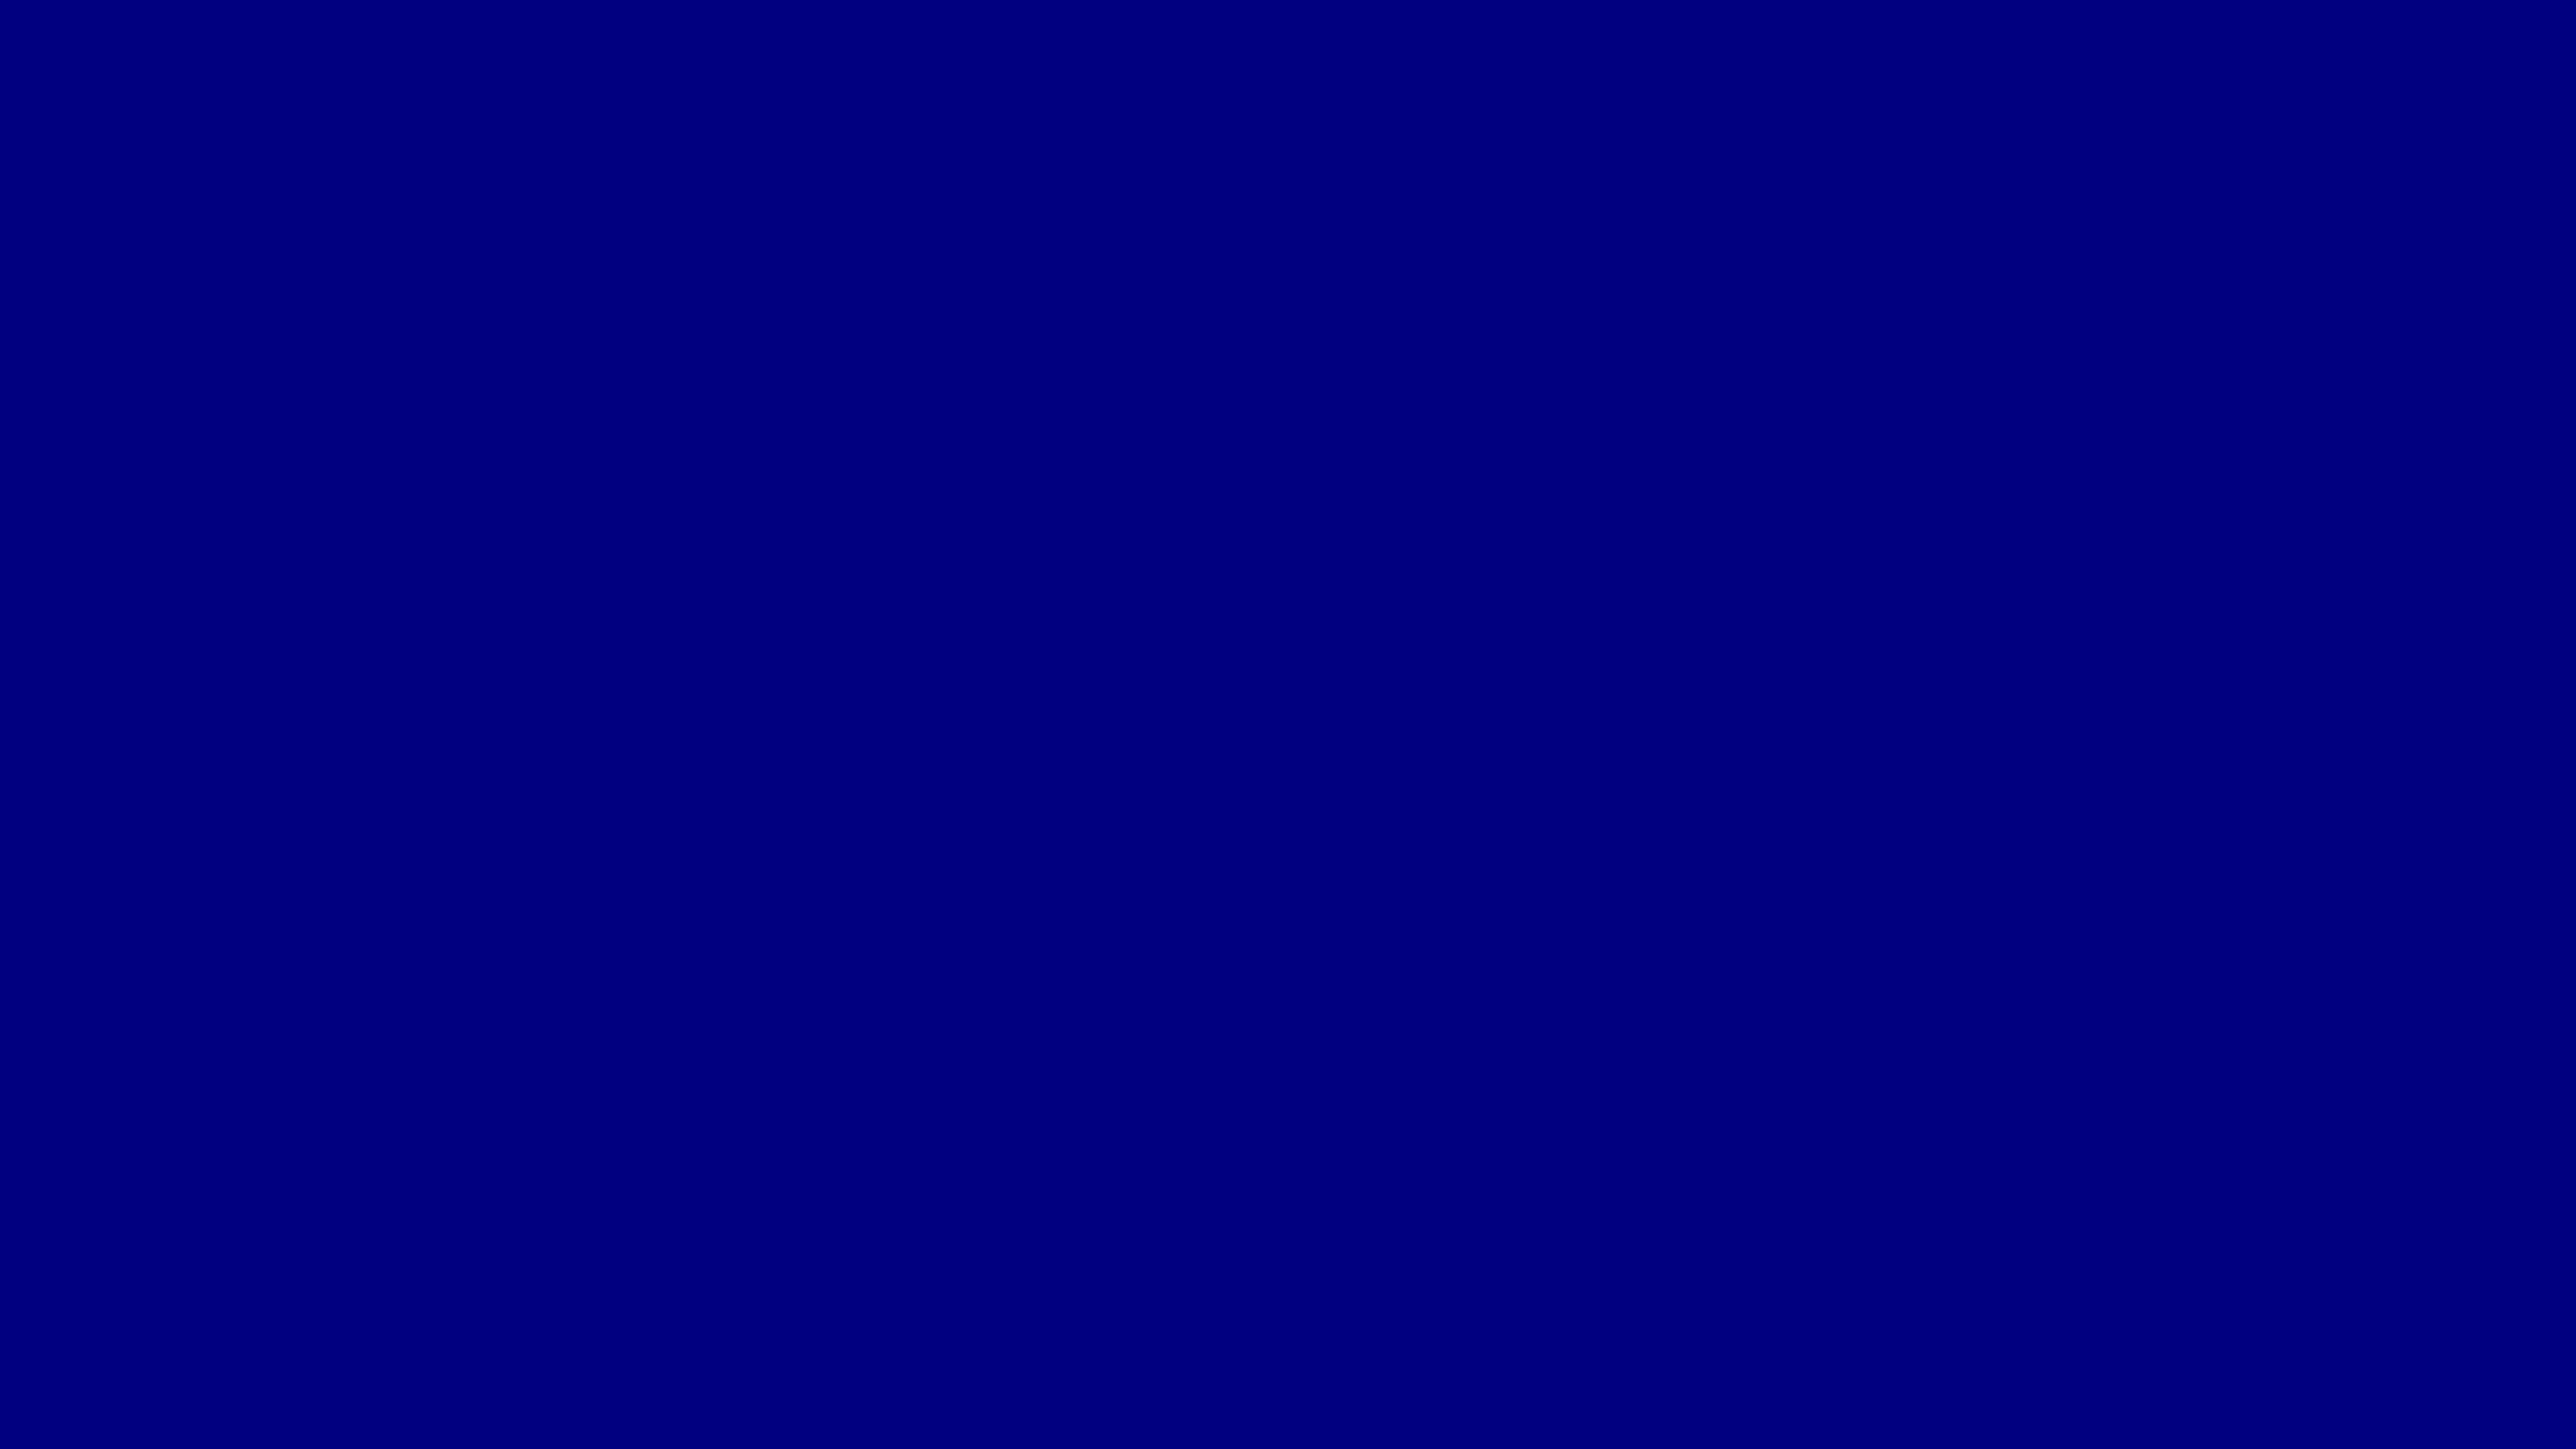 5120x2880 Navy Blue Solid Color Background